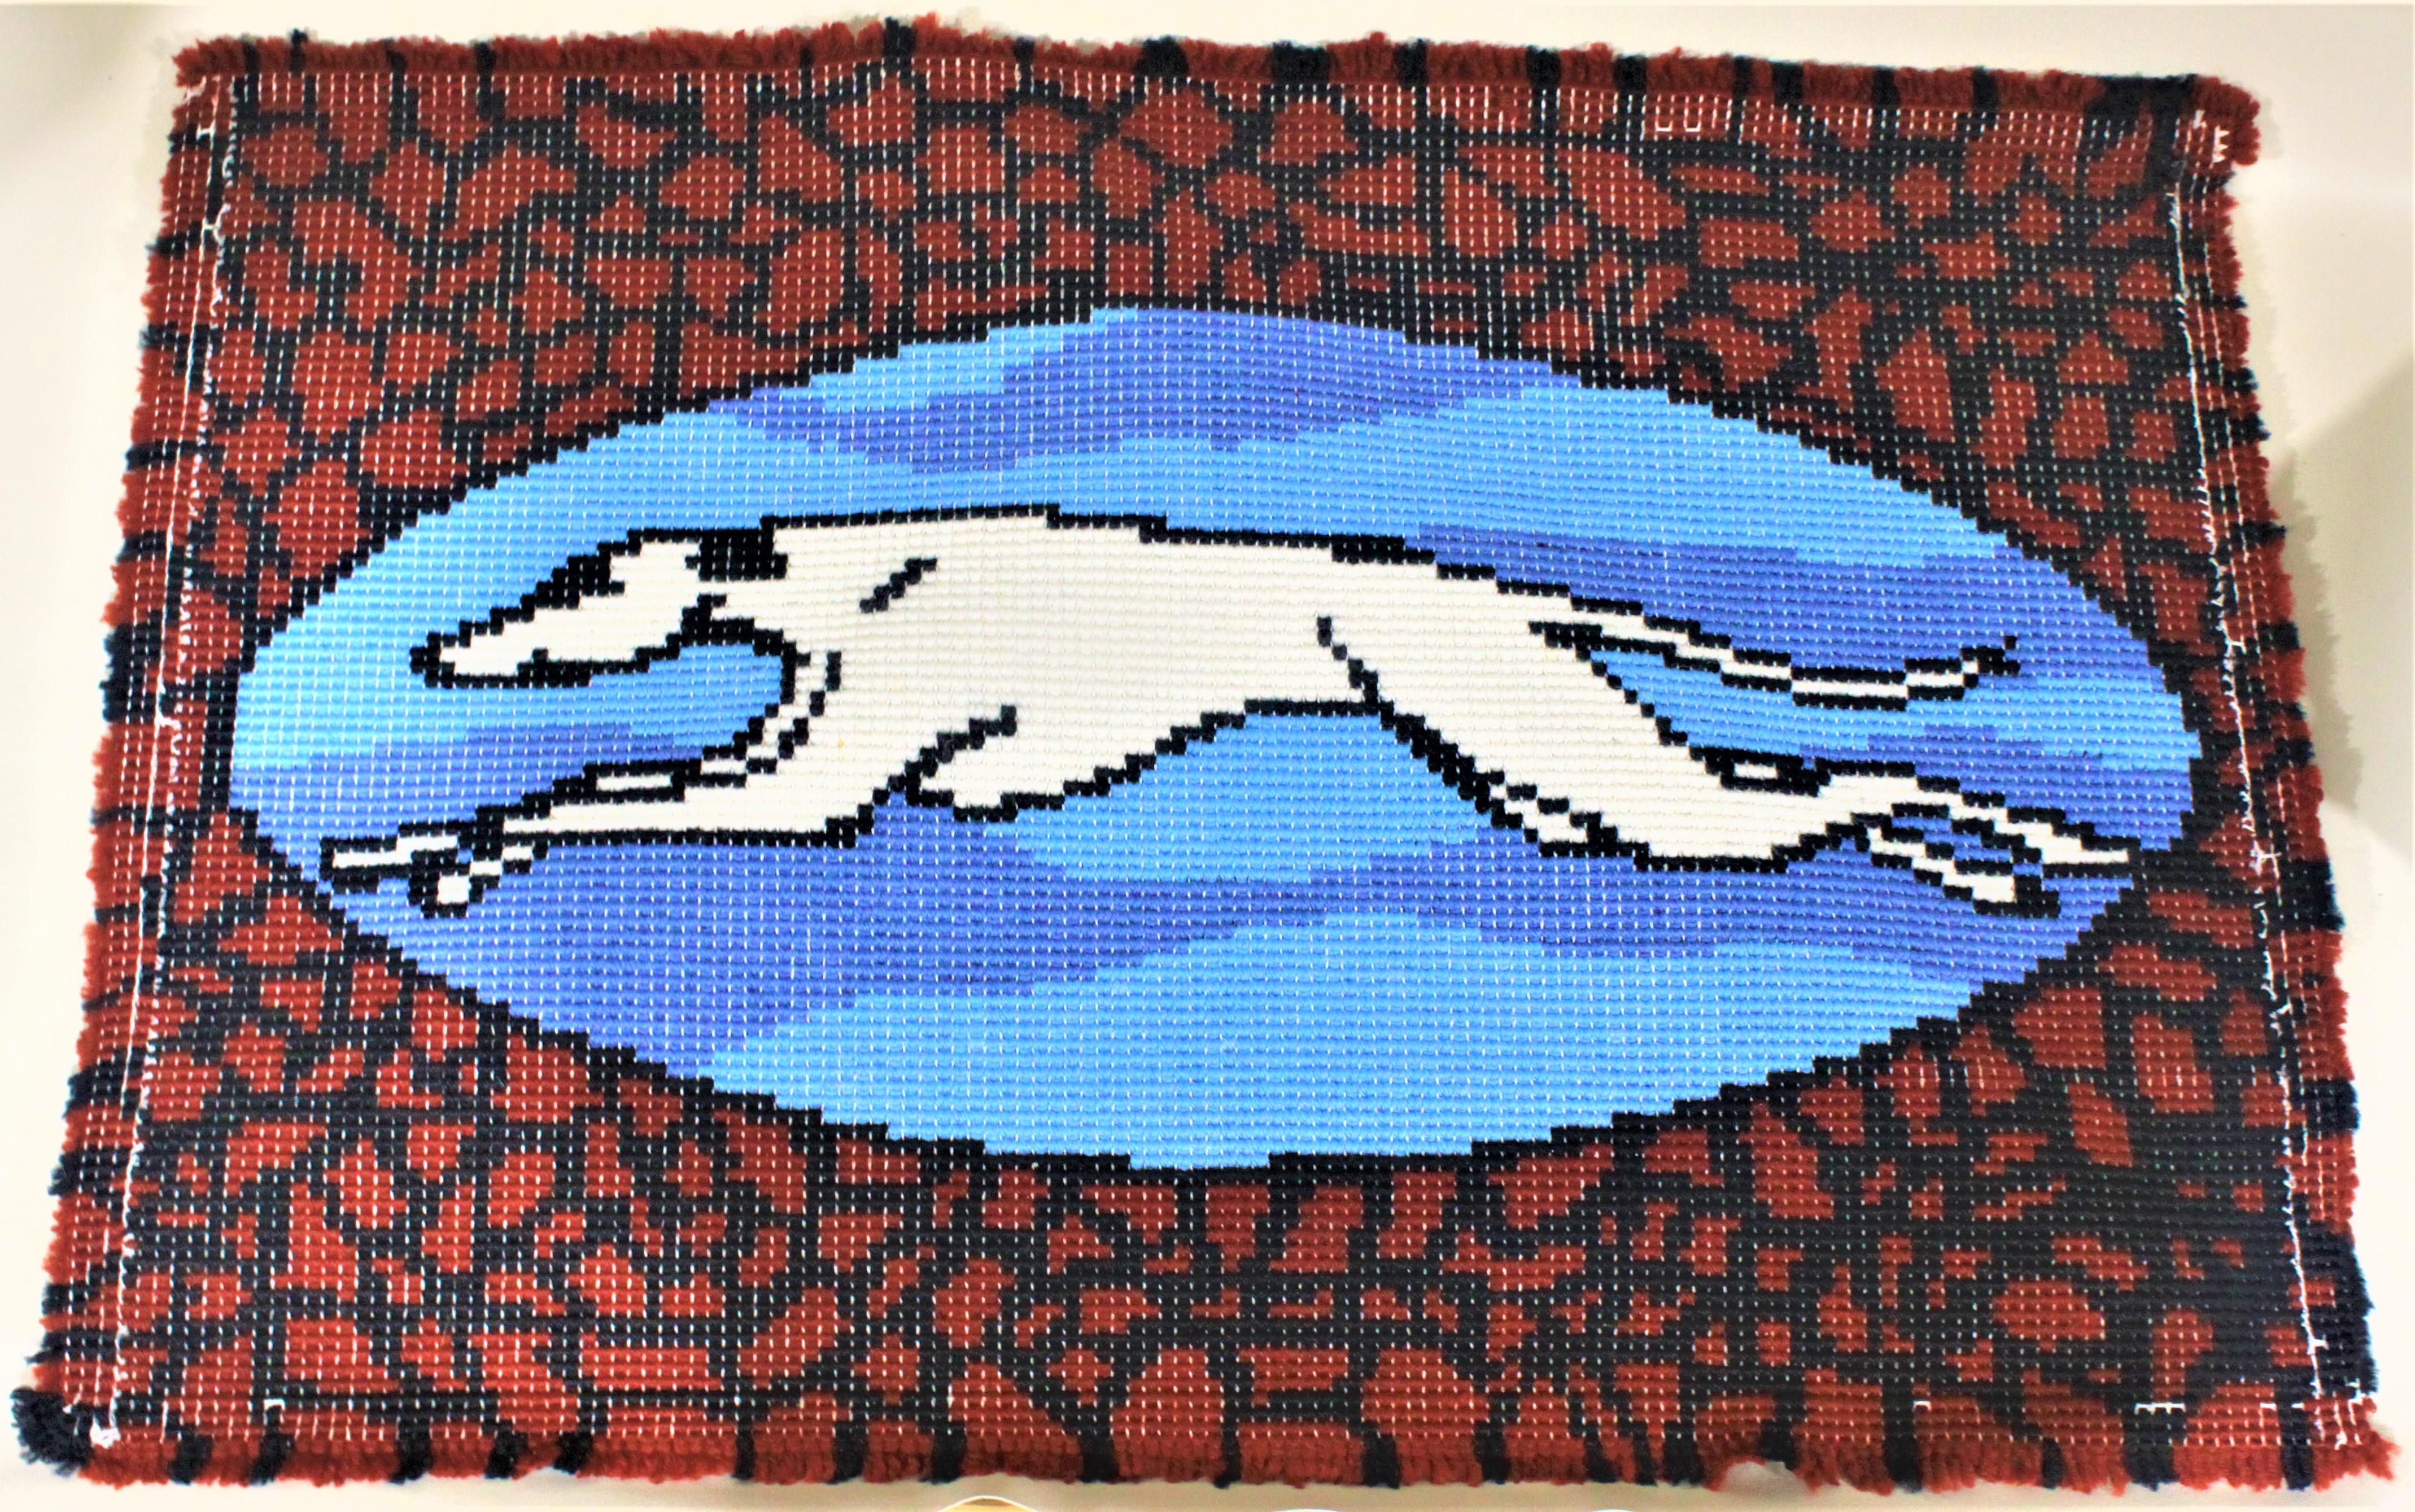 This unique and colorful Folk Art hooked rug was designed and crafted sometime between 1970 and 1980 and could be easily be adapted for use as a wall hanging. This rug is presumably made from synthetic wool and employs five colors to represent the